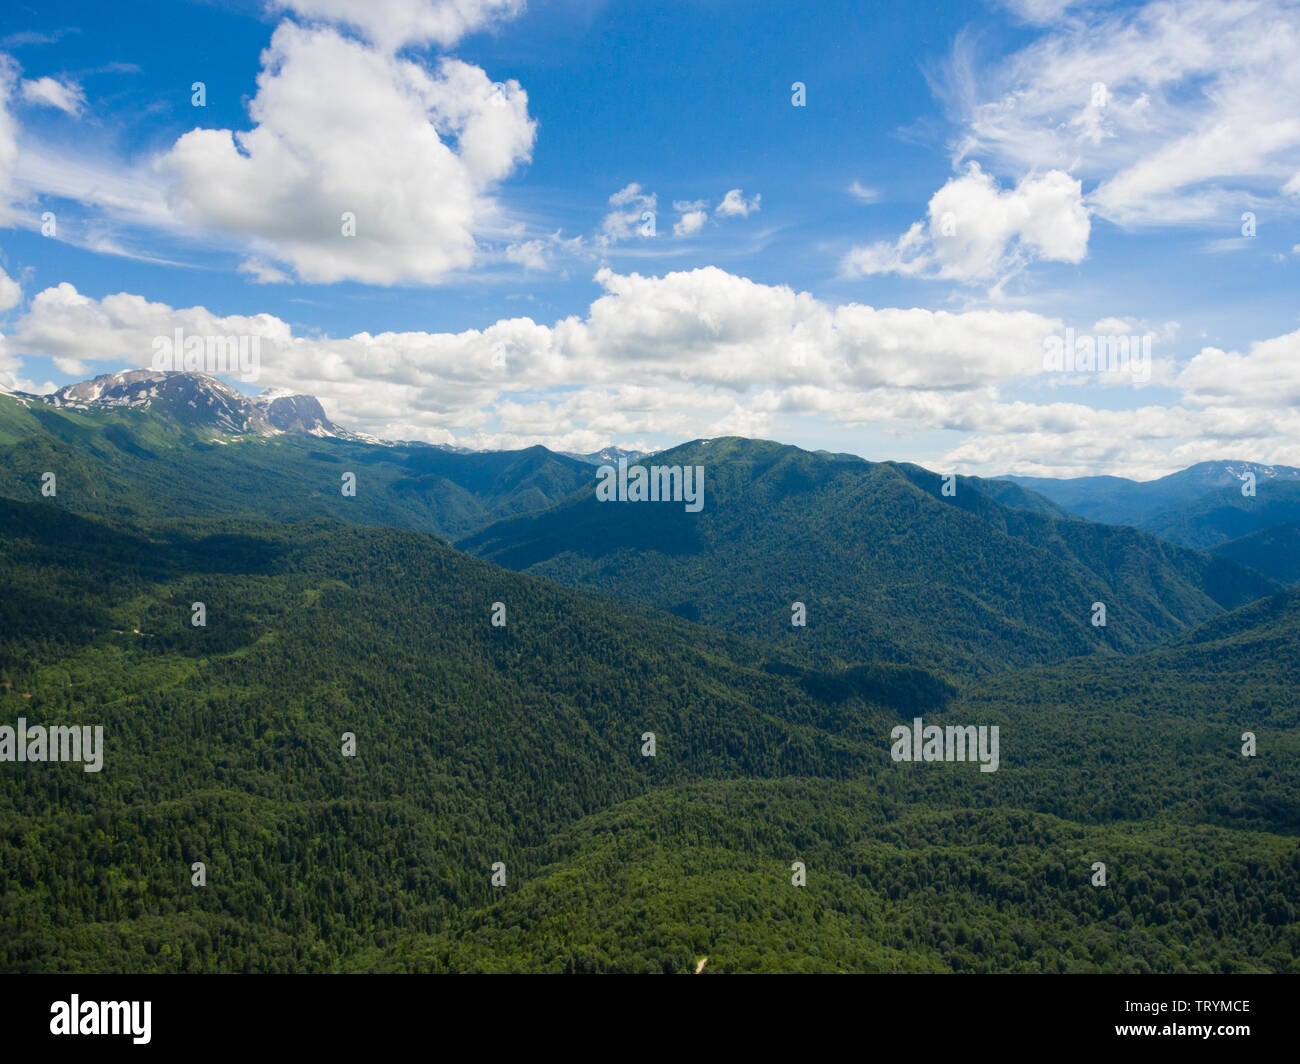 Aerial photo. Summer landscape with mountain peaks covered with snow, cloudy sky and a segment of the road through the oak forest. Stock Photo